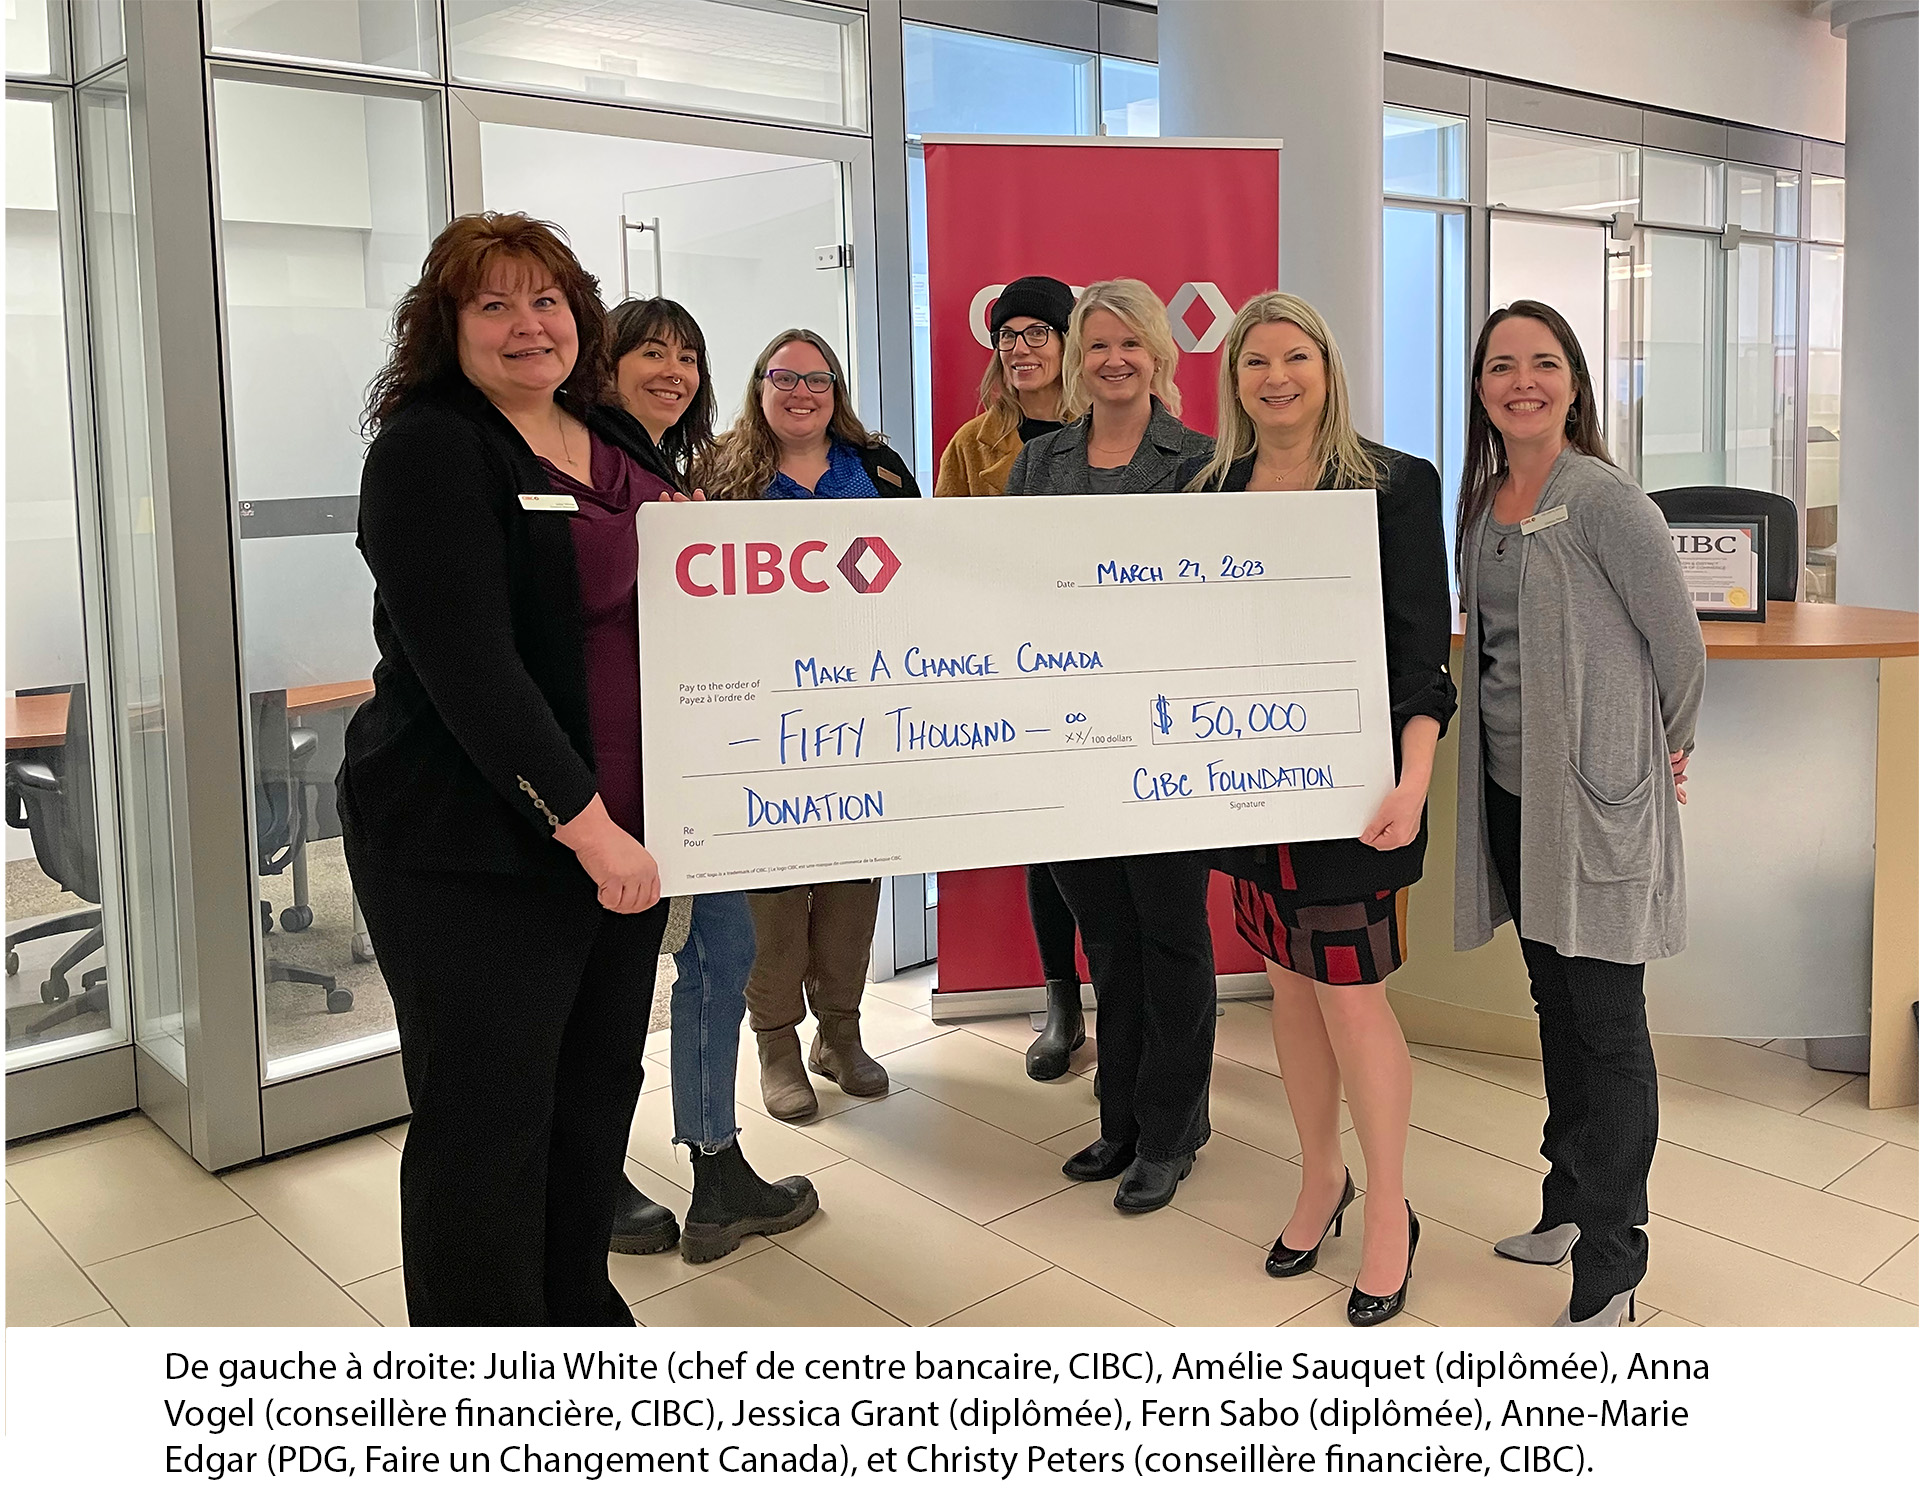 Seven women grouped together holding a jumbo cheque of $50,000 from CIBC Foundation to Make A Change Canada.